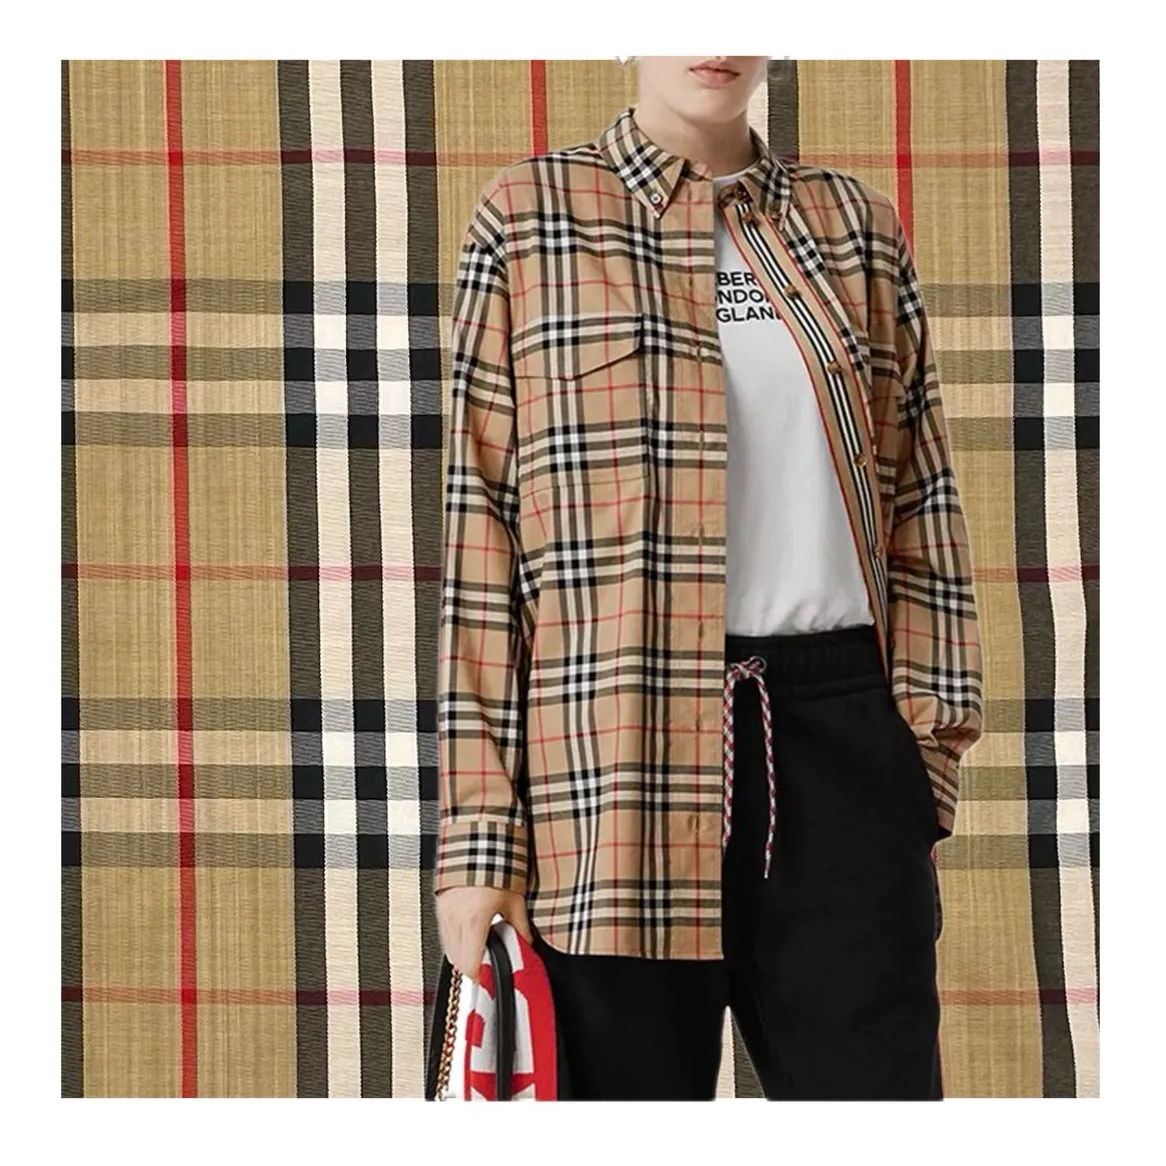 Factory's new color woven plaid twisted shirt windproof jacket made of polyester fabric